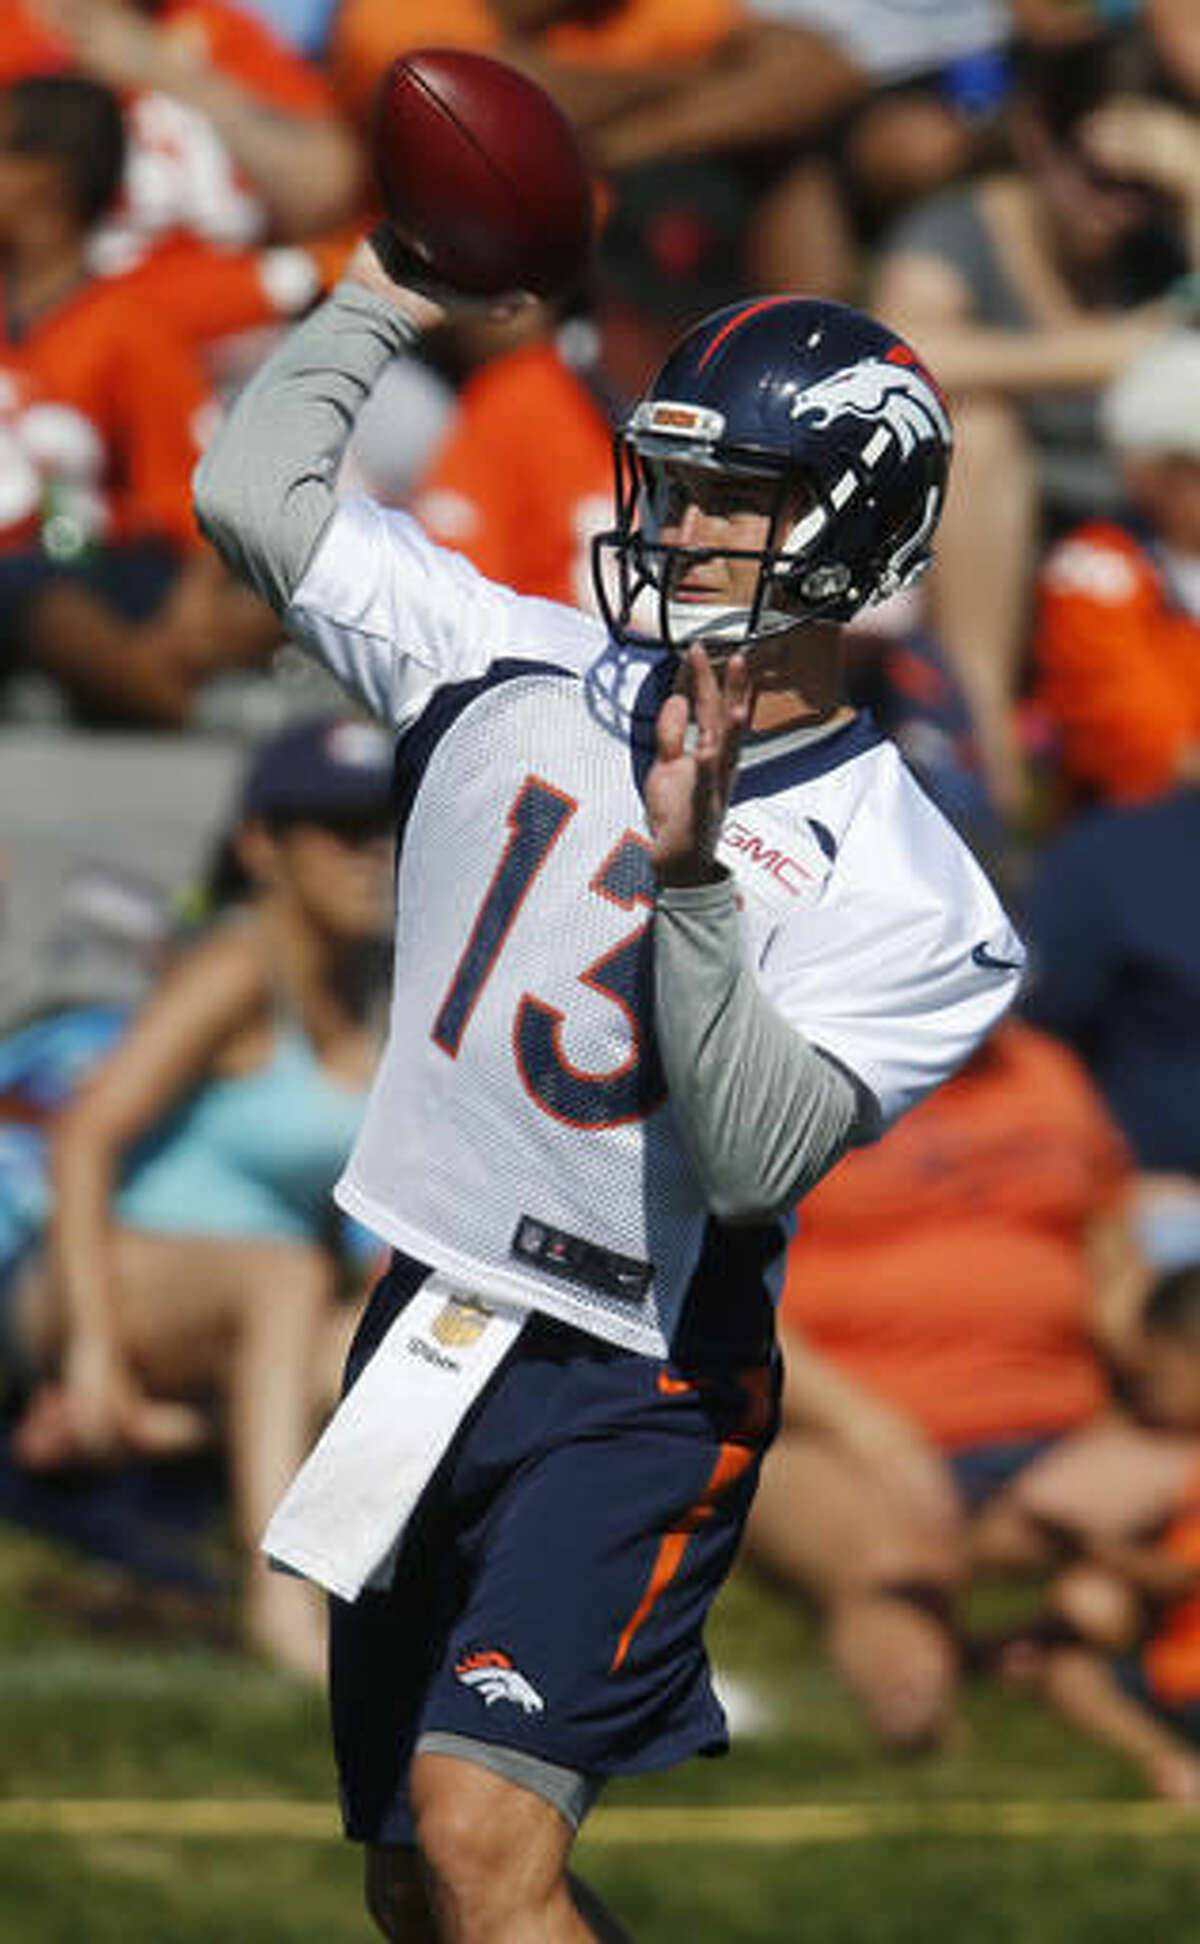 Denver Broncos quarterback Trevor Siemian takes part in drills during the team's NFL football practice Monday, Aug. 8, 2016 in Englewood, Colo. (AP Photo/David Zalubowski)